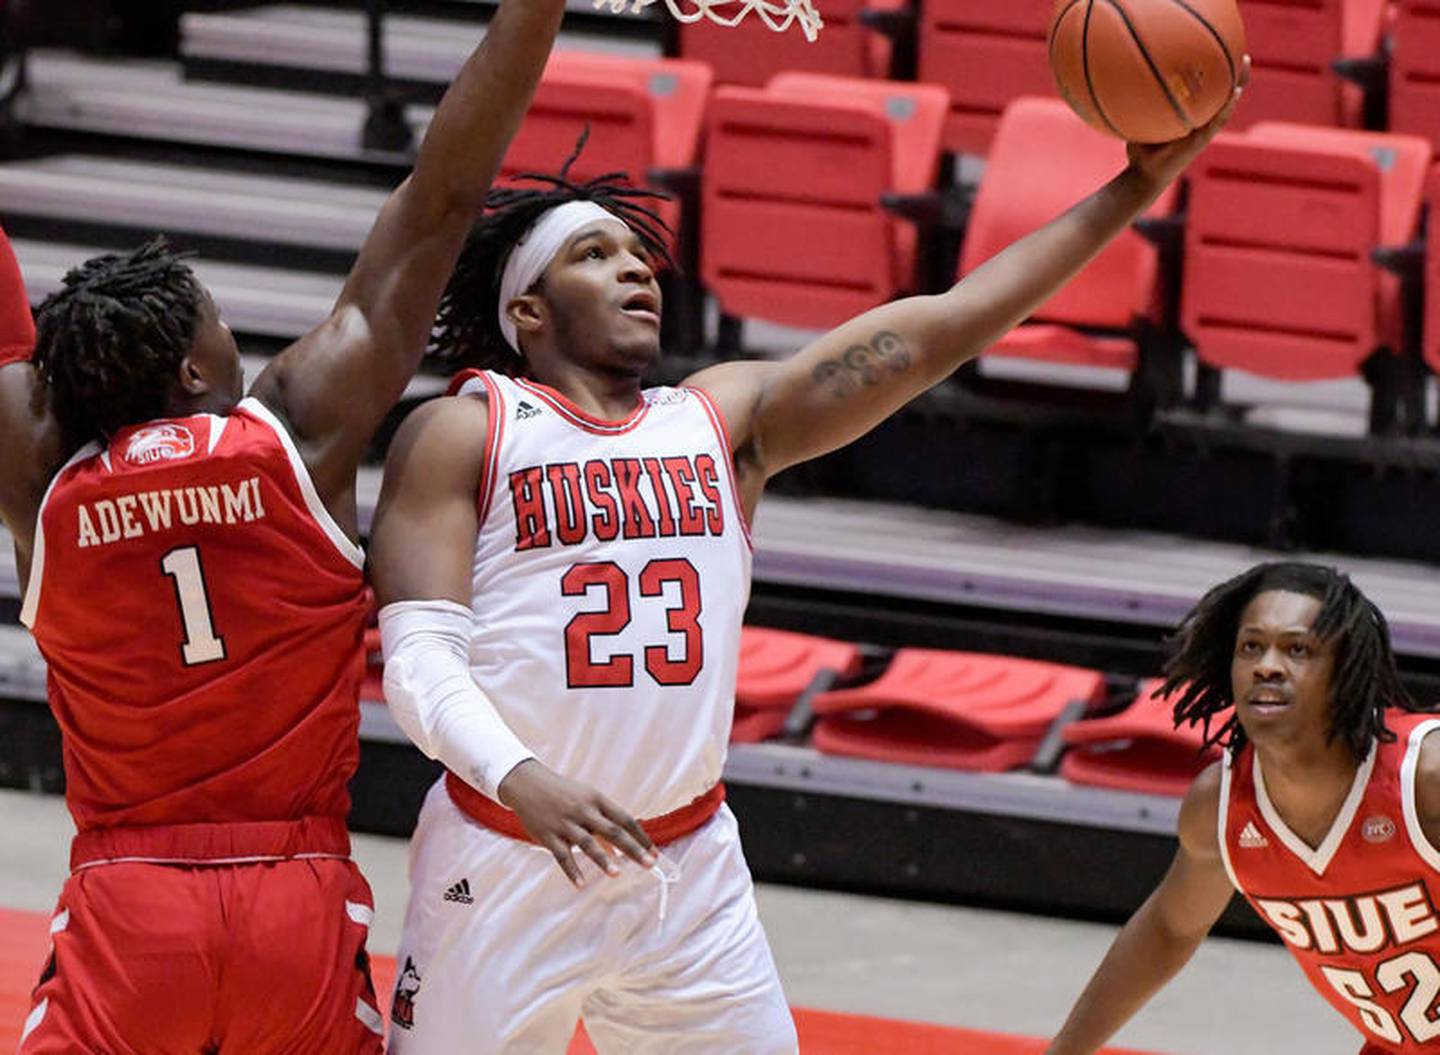 NIU’s Tyler Cochran (23) lays up for a shot after getting past SIUE’s Mike Adewunmi (1) during the first half of play at Northern Illinois University's Convocation Center on Wednesday, Dec. 2, 2020 in DeKalb.